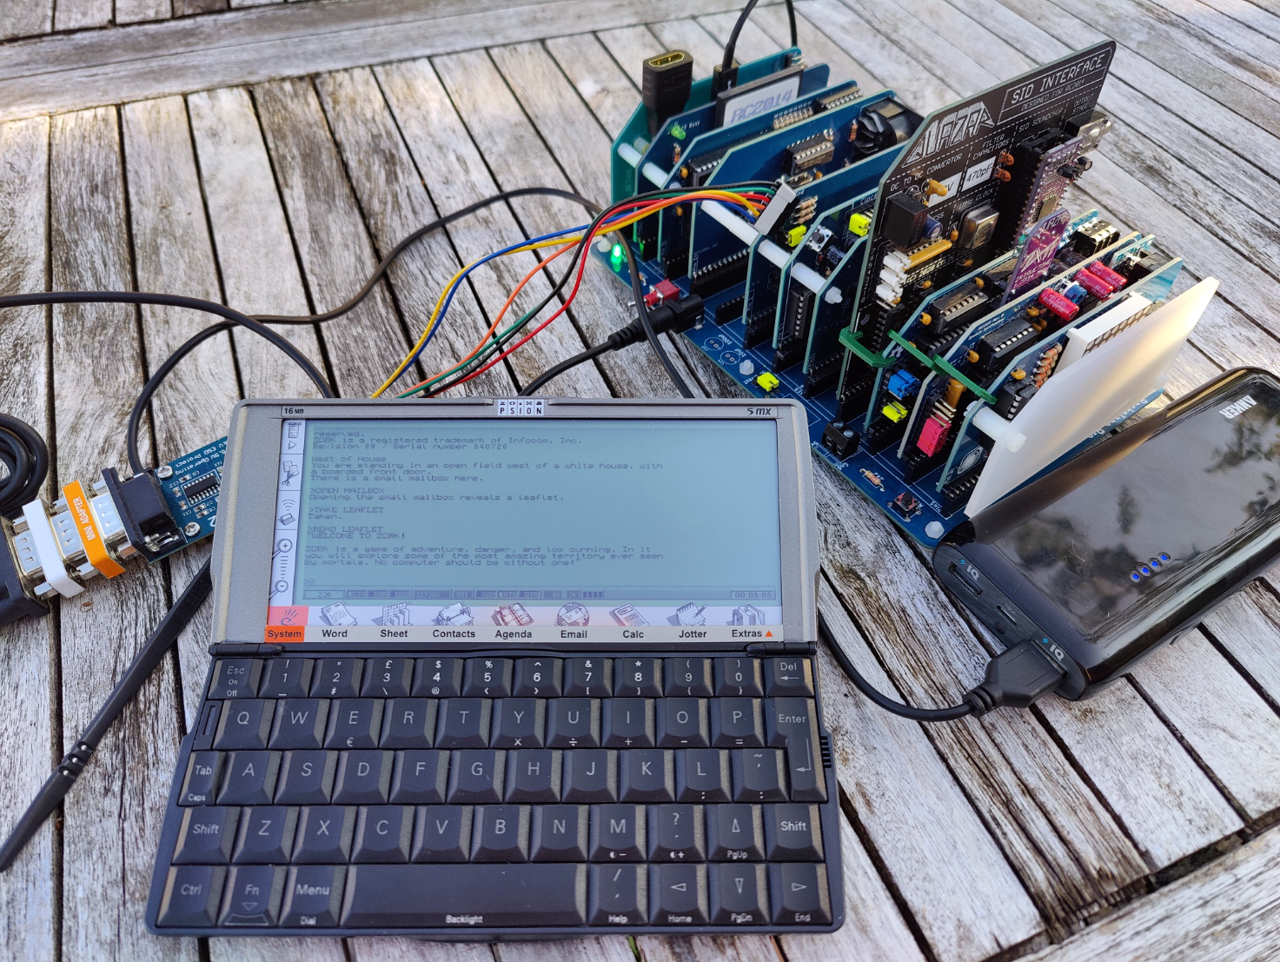 Psion 5MX, connected to RC2014